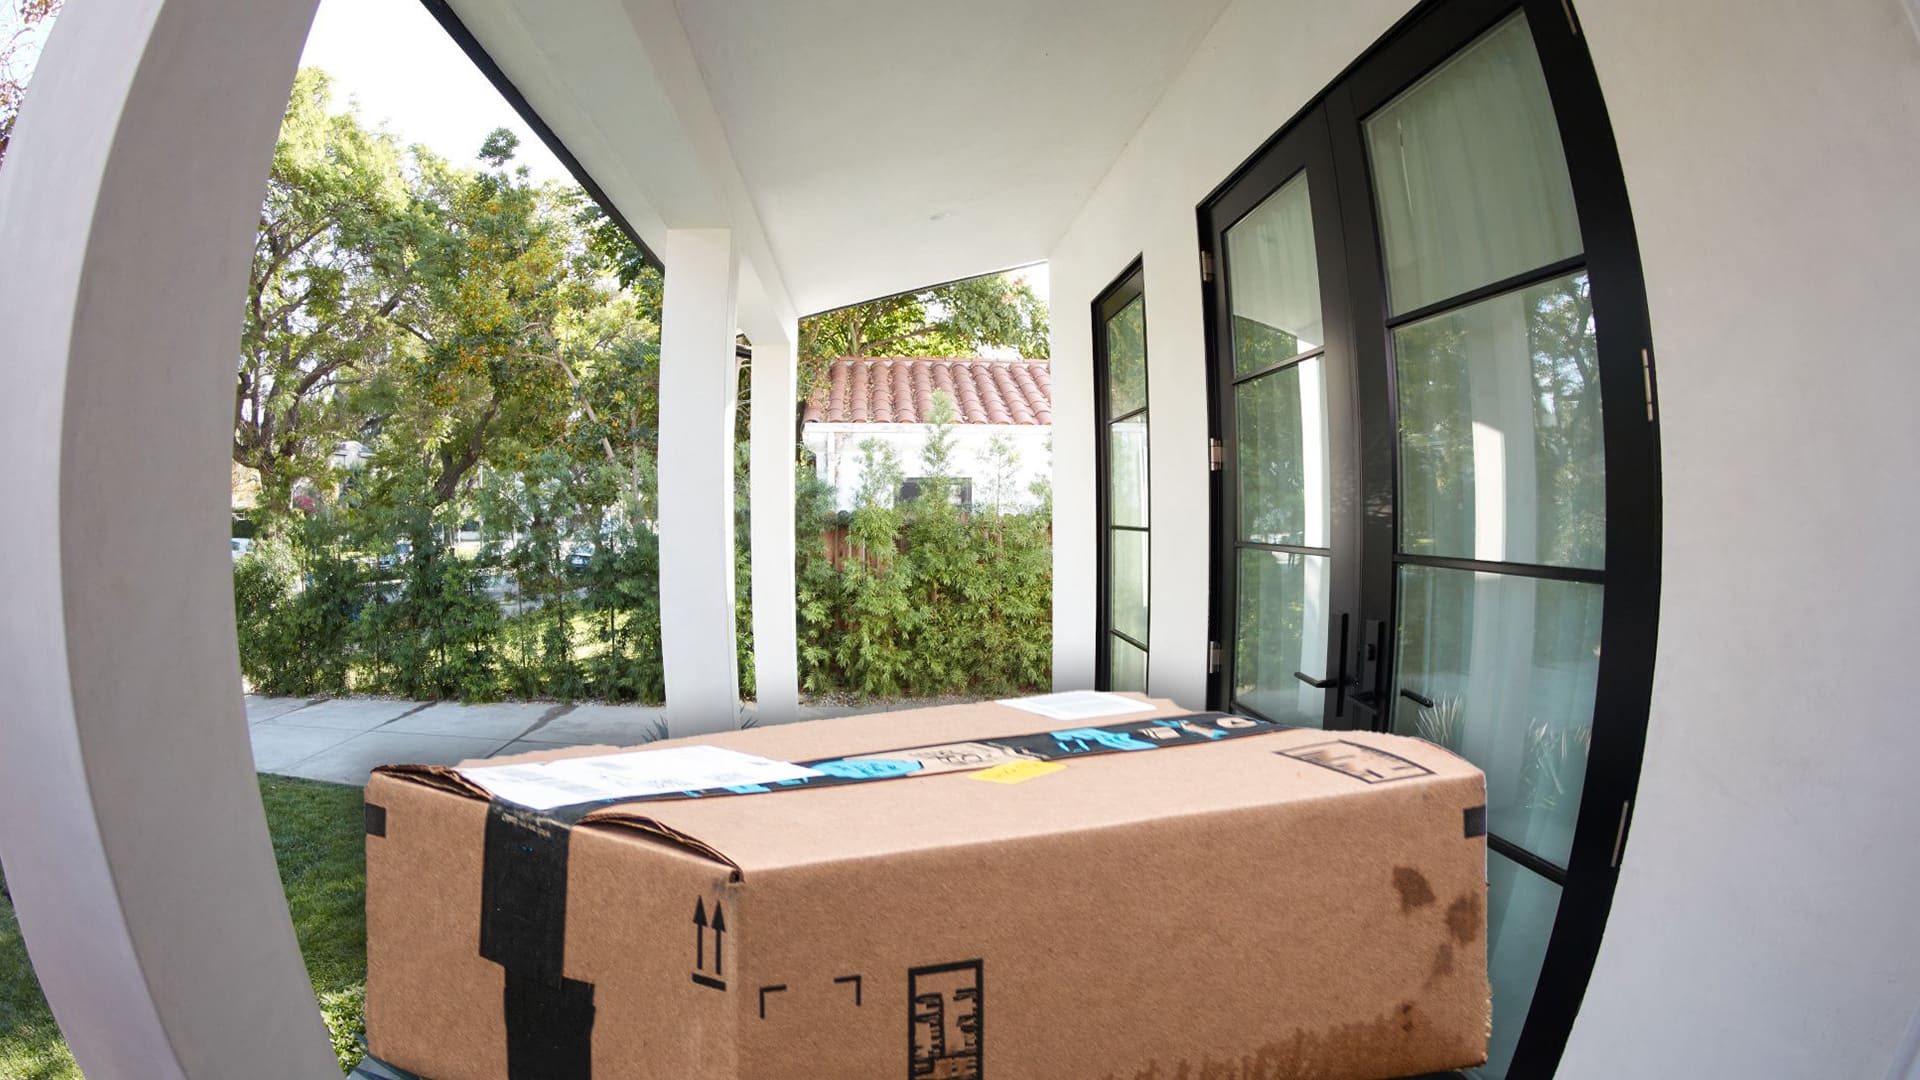 package on front porch